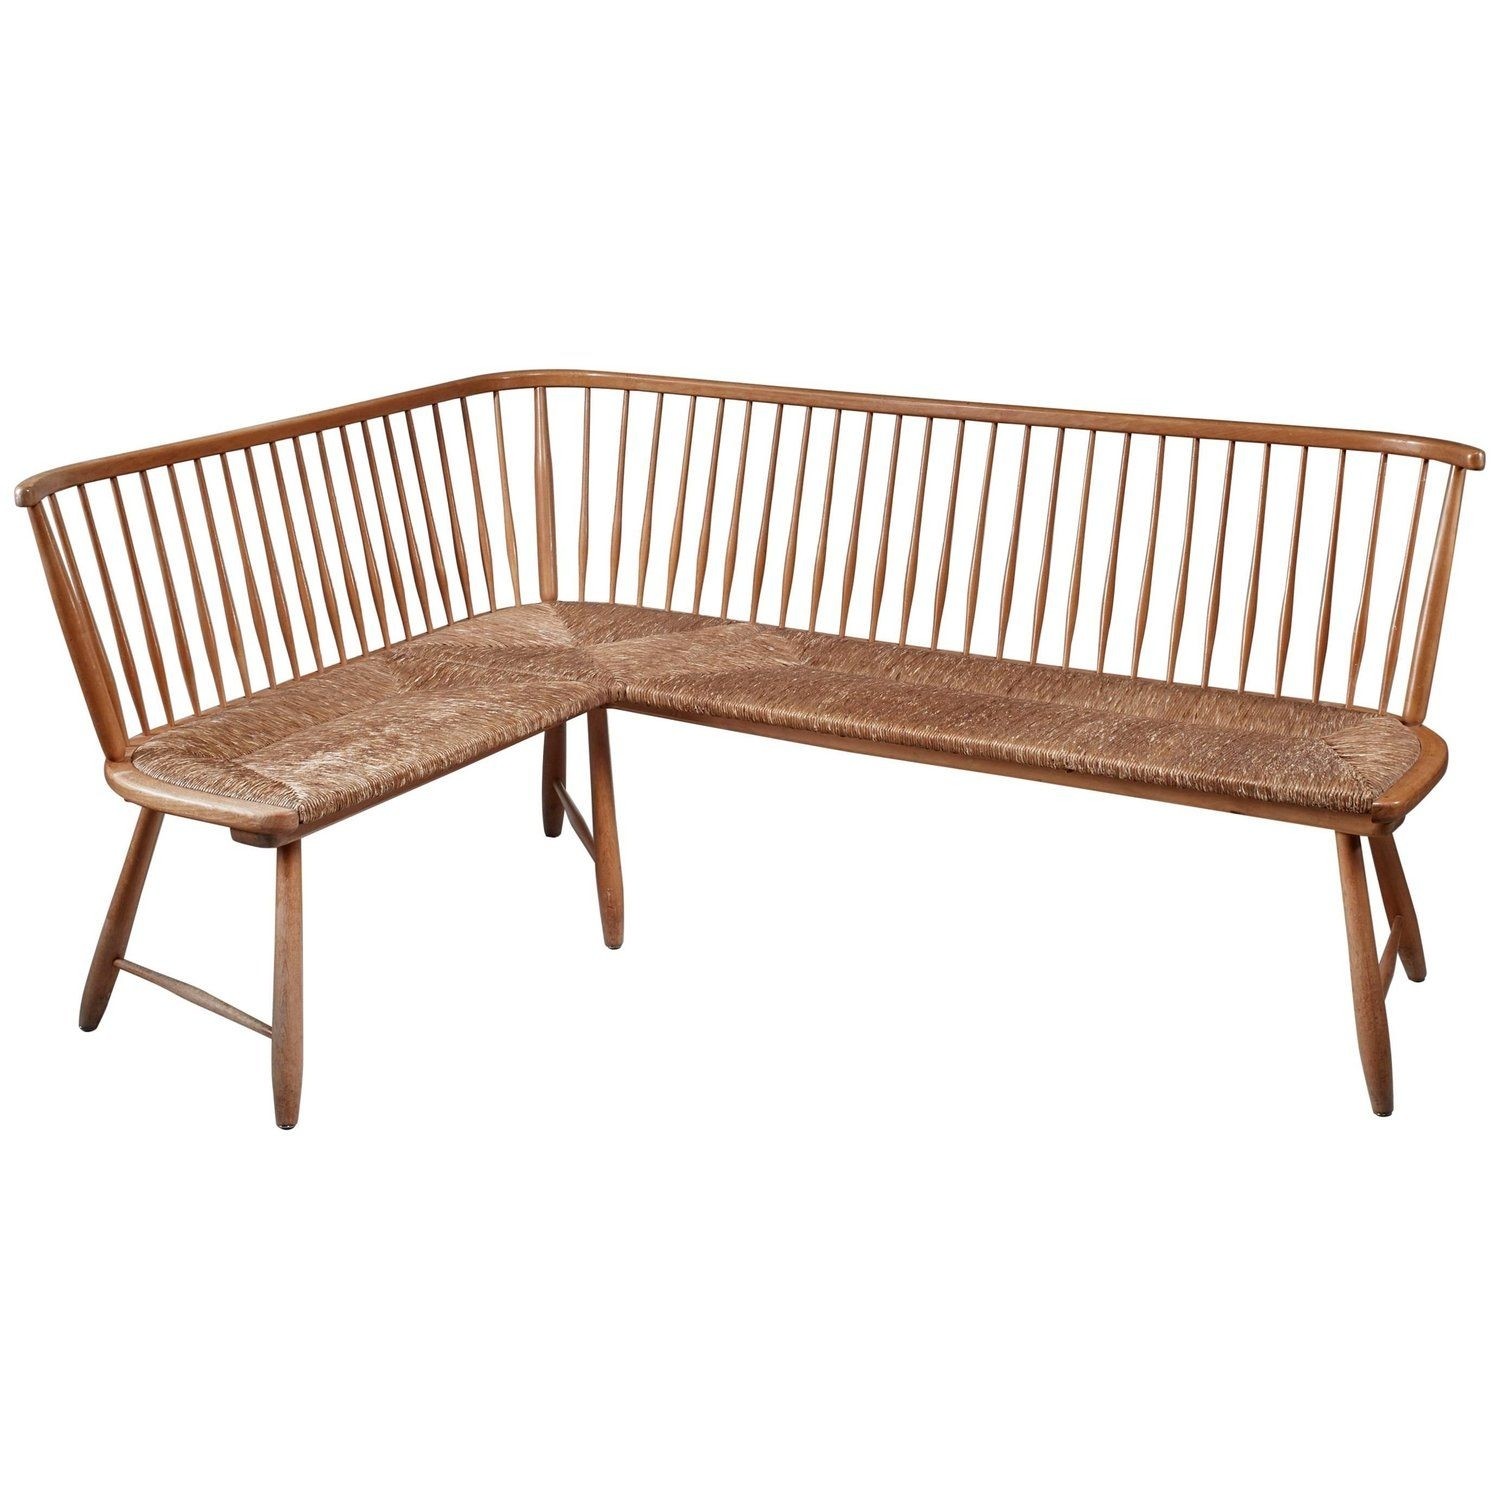 Beech and cane corner bench by german architect arno